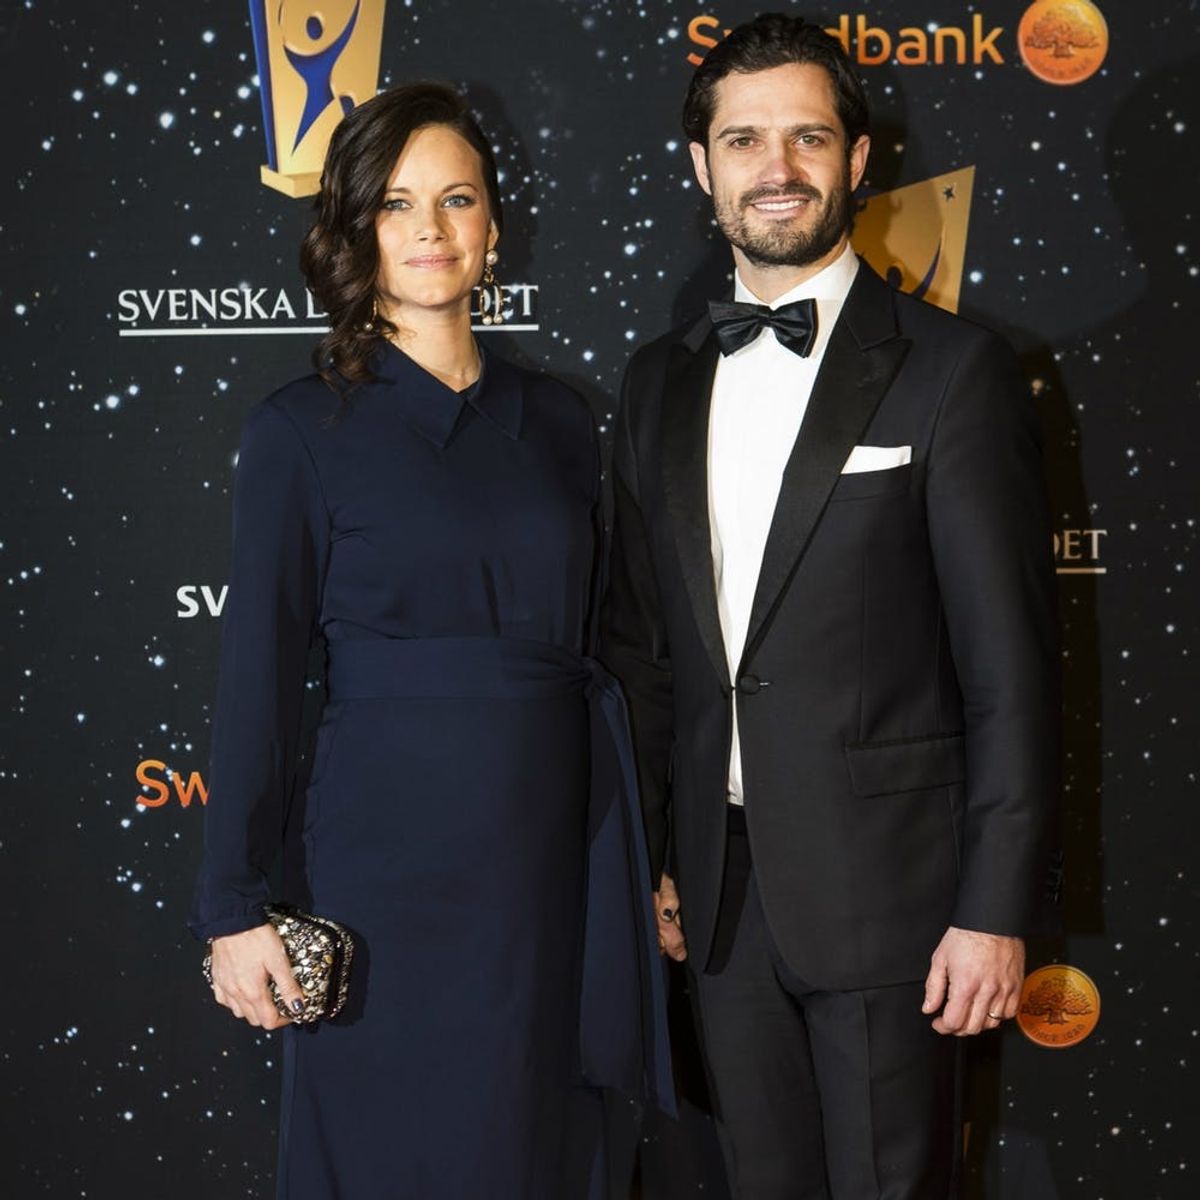 See Princess Sofia and Prince Carl Philip’s First Family Photos